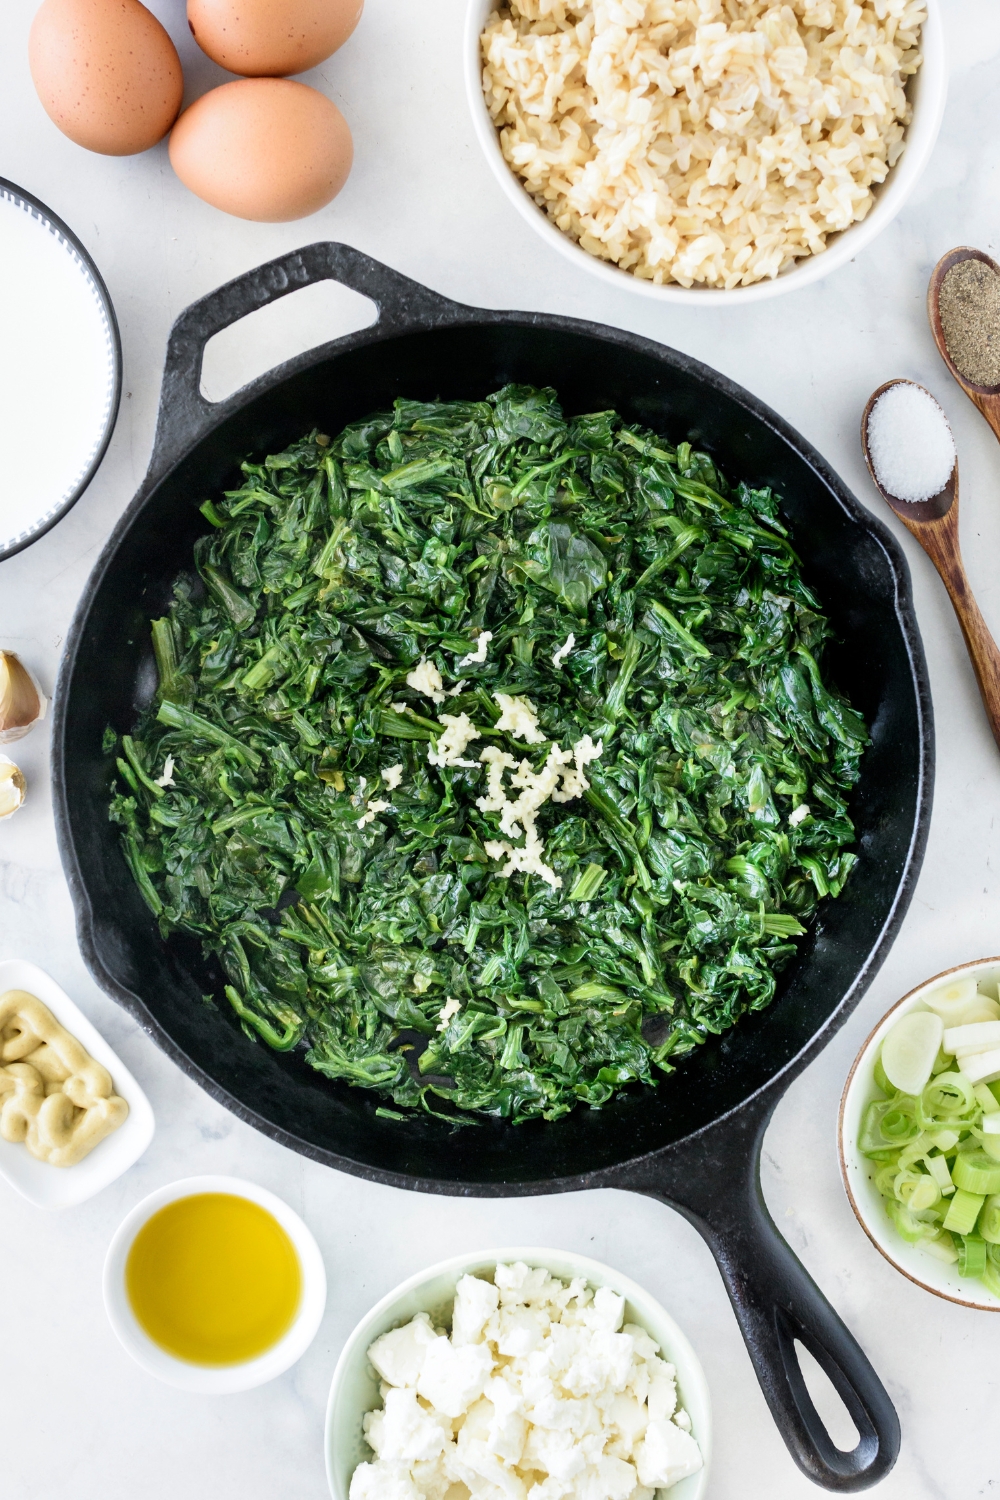 A skillet cooking the spinach and garlic.